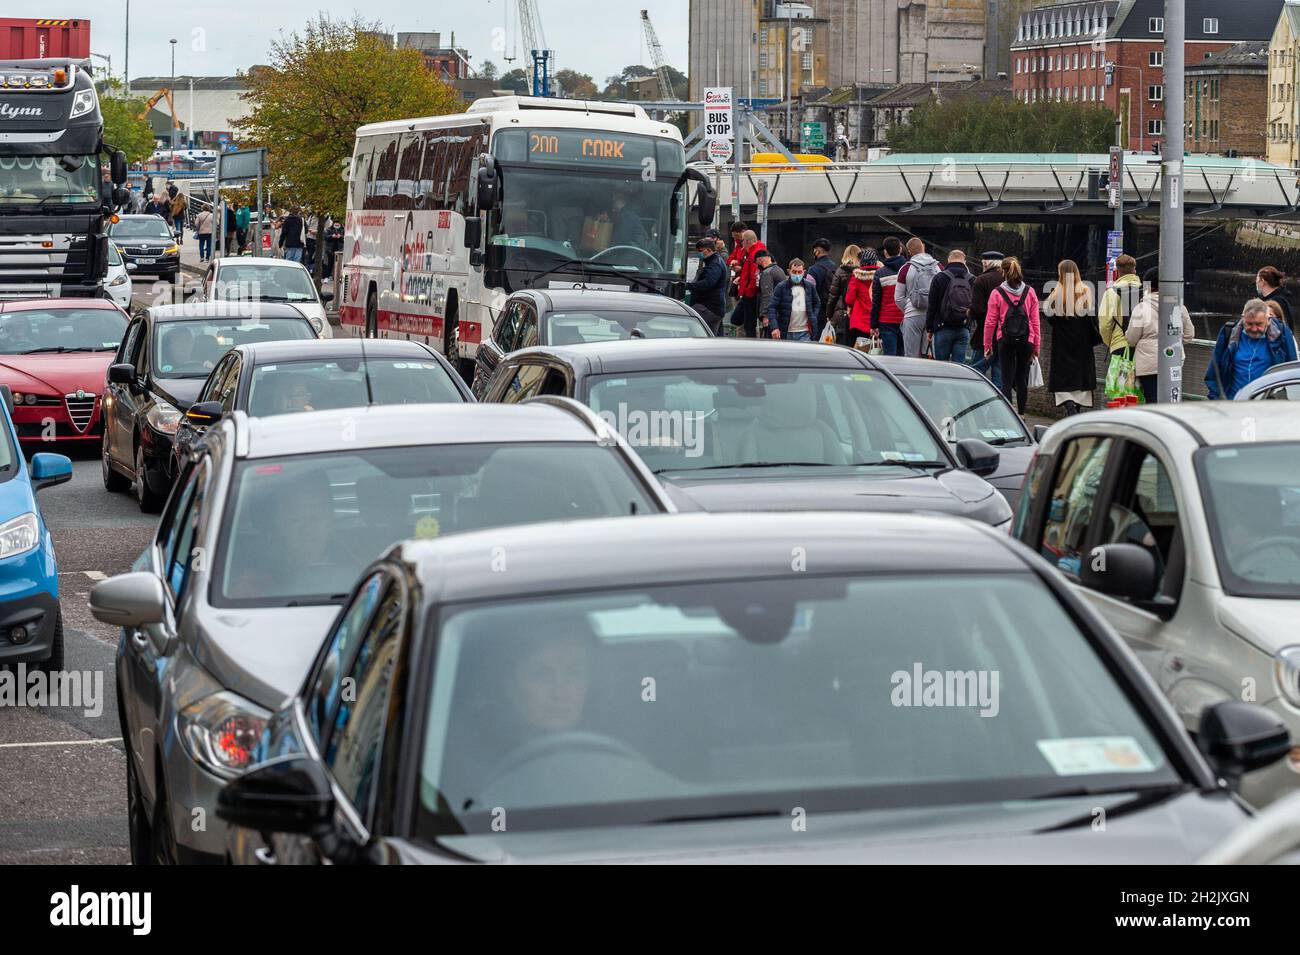 Cork, Ireland. 22nd Oct, 2021. Cork city centre was extremely busy this afternoon with many people leaving the city for the bank holiday weekend and also music fans descending on Cork for the Jazz Festival. Credit: AG News/Alamy Live News Stock Photo